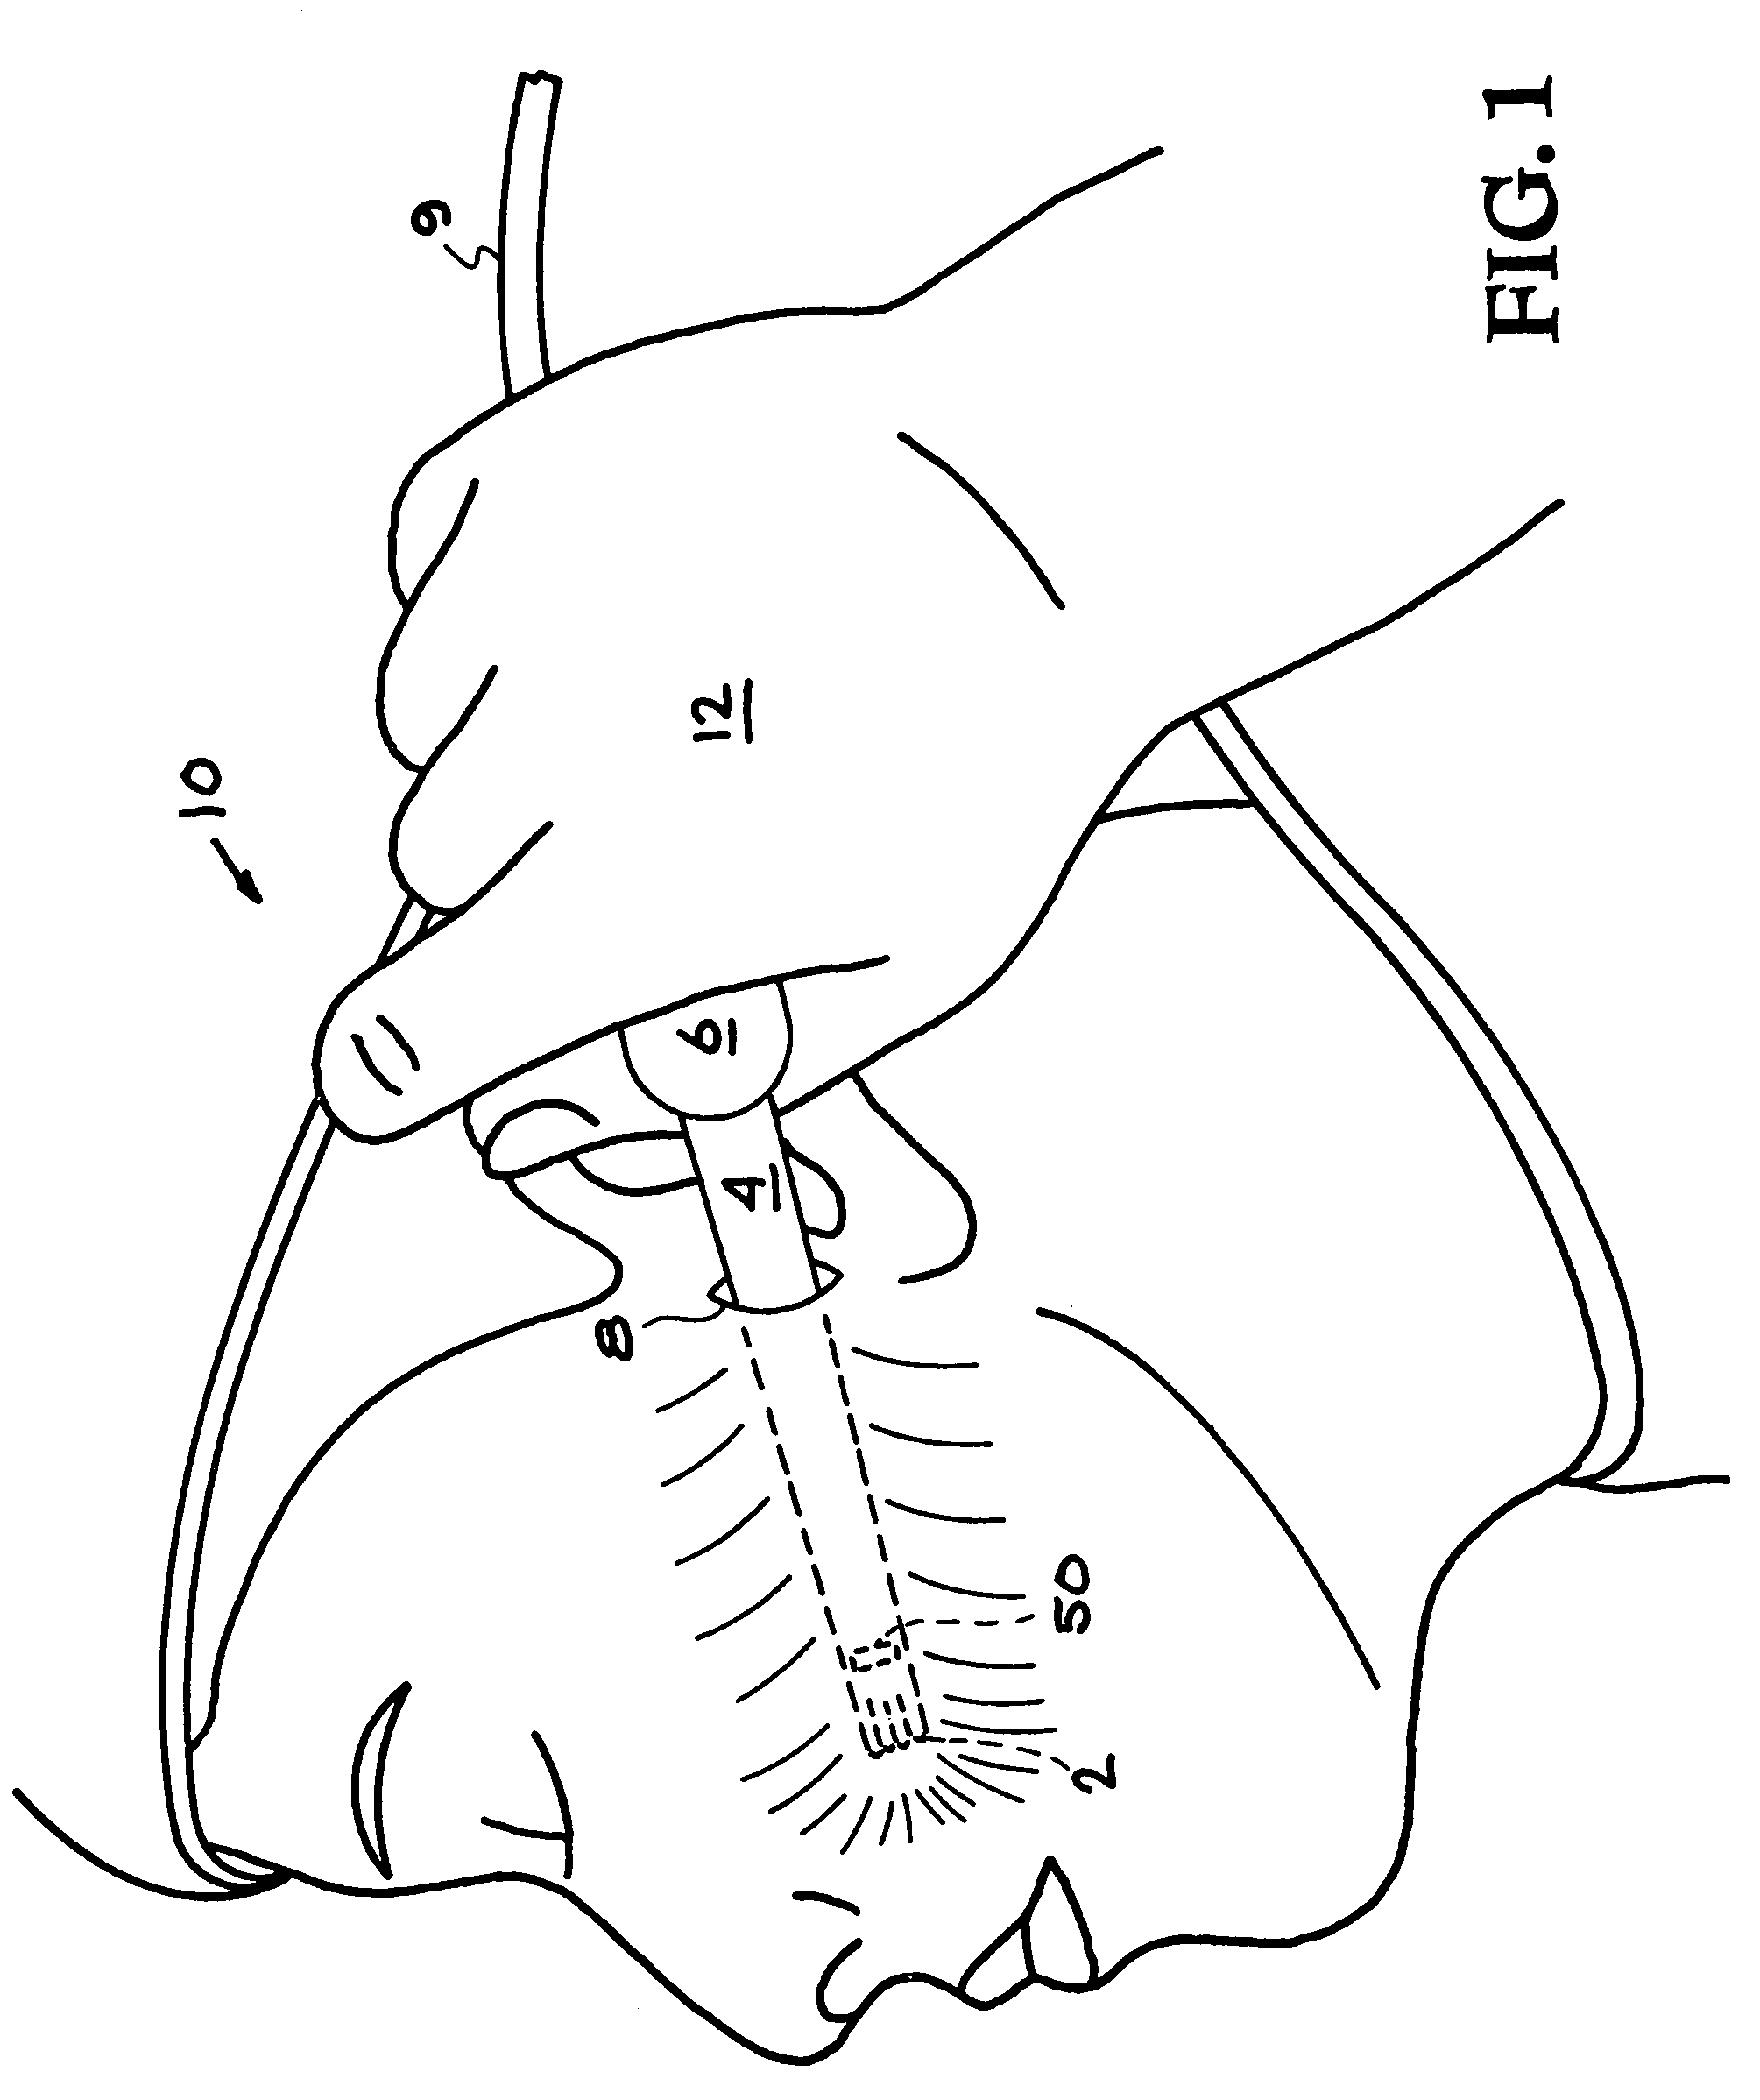 Face-lifting device